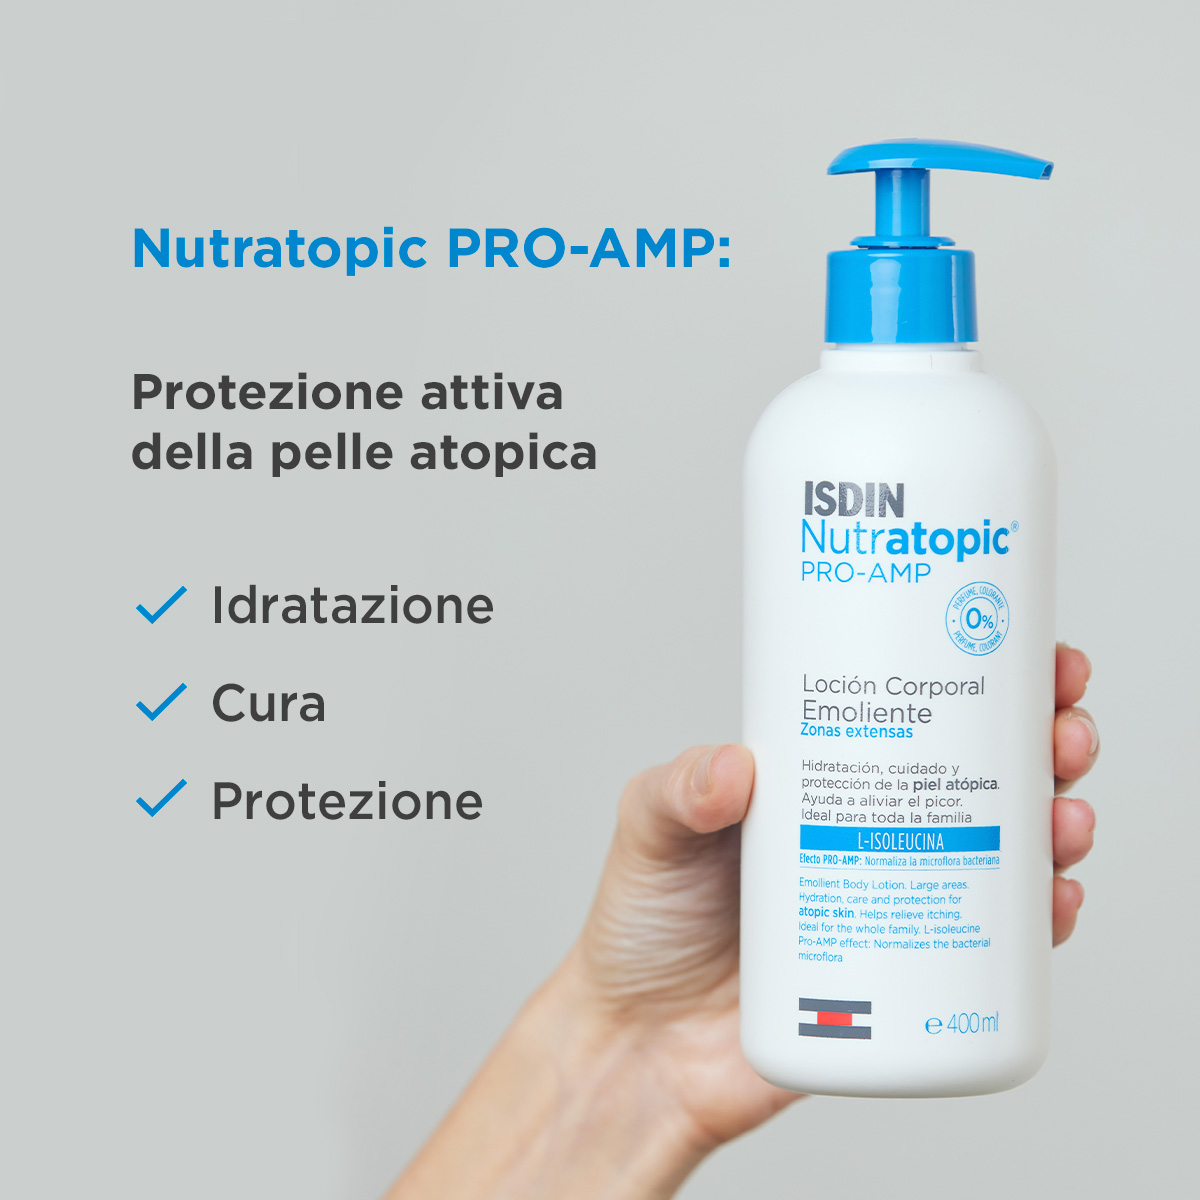 Nutratopic PRO-AMP